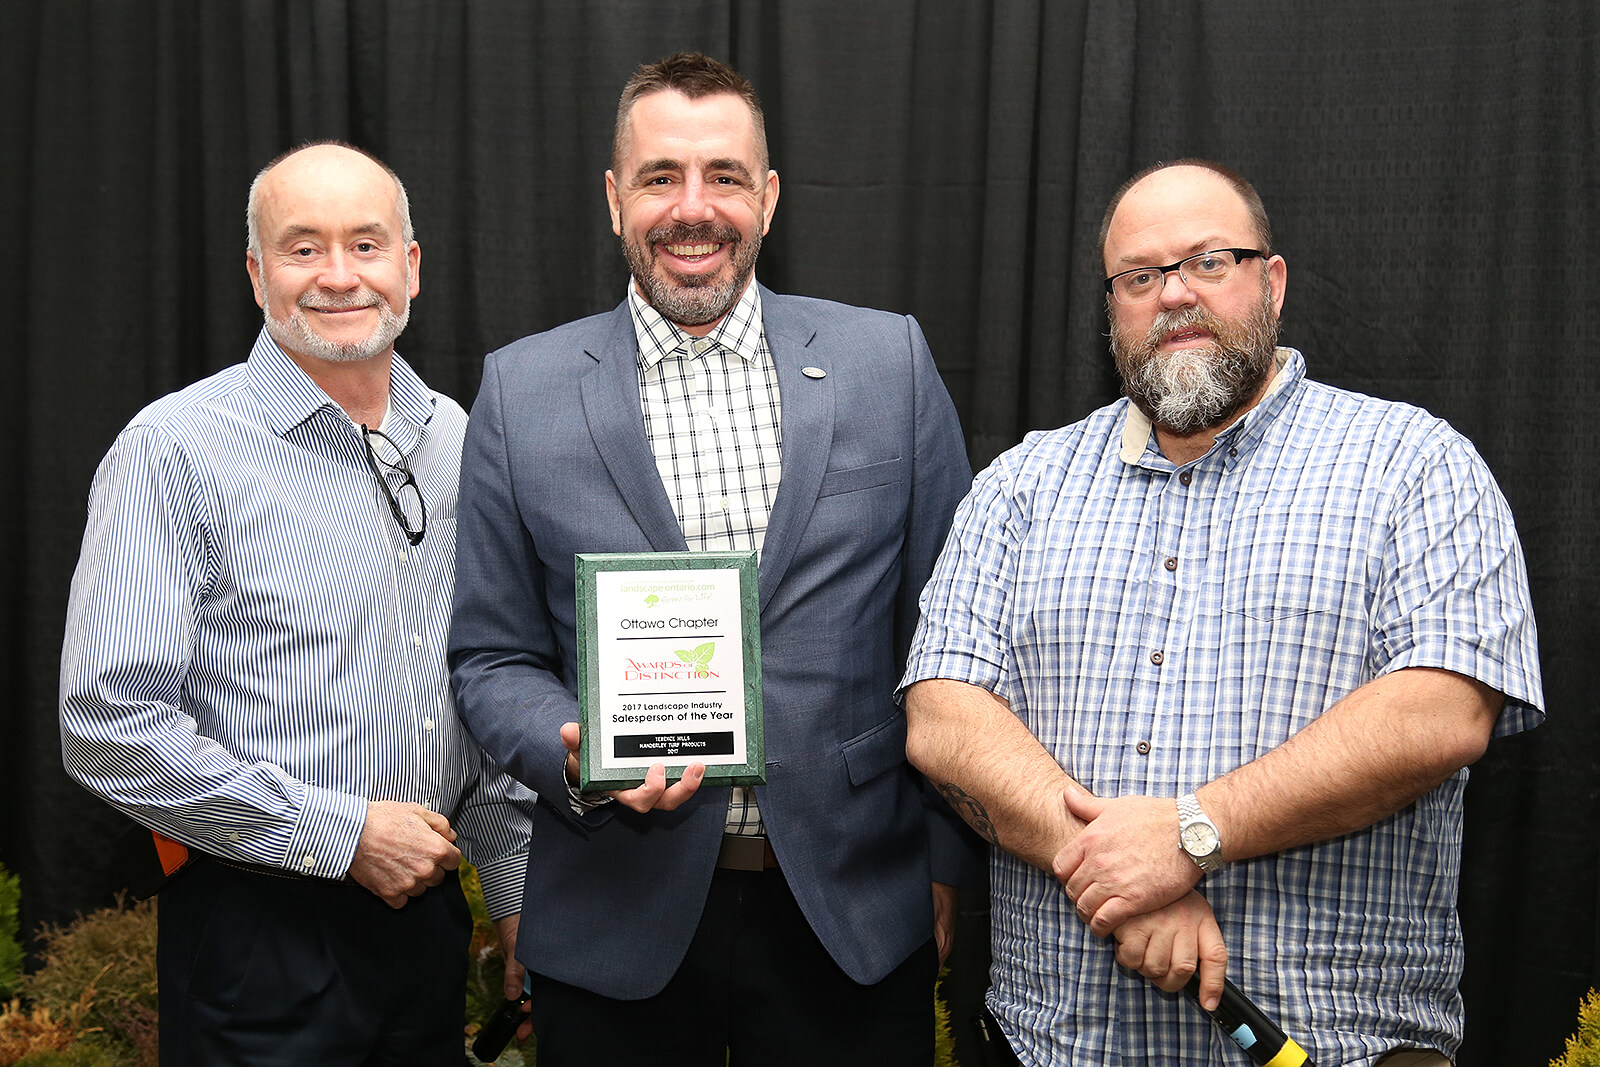 Terrence Hills, 2017 Salesperson of the Year (centre), flanked by Ottawa Chapter’s Bruce Morton (left) and Ed Hansen (right).